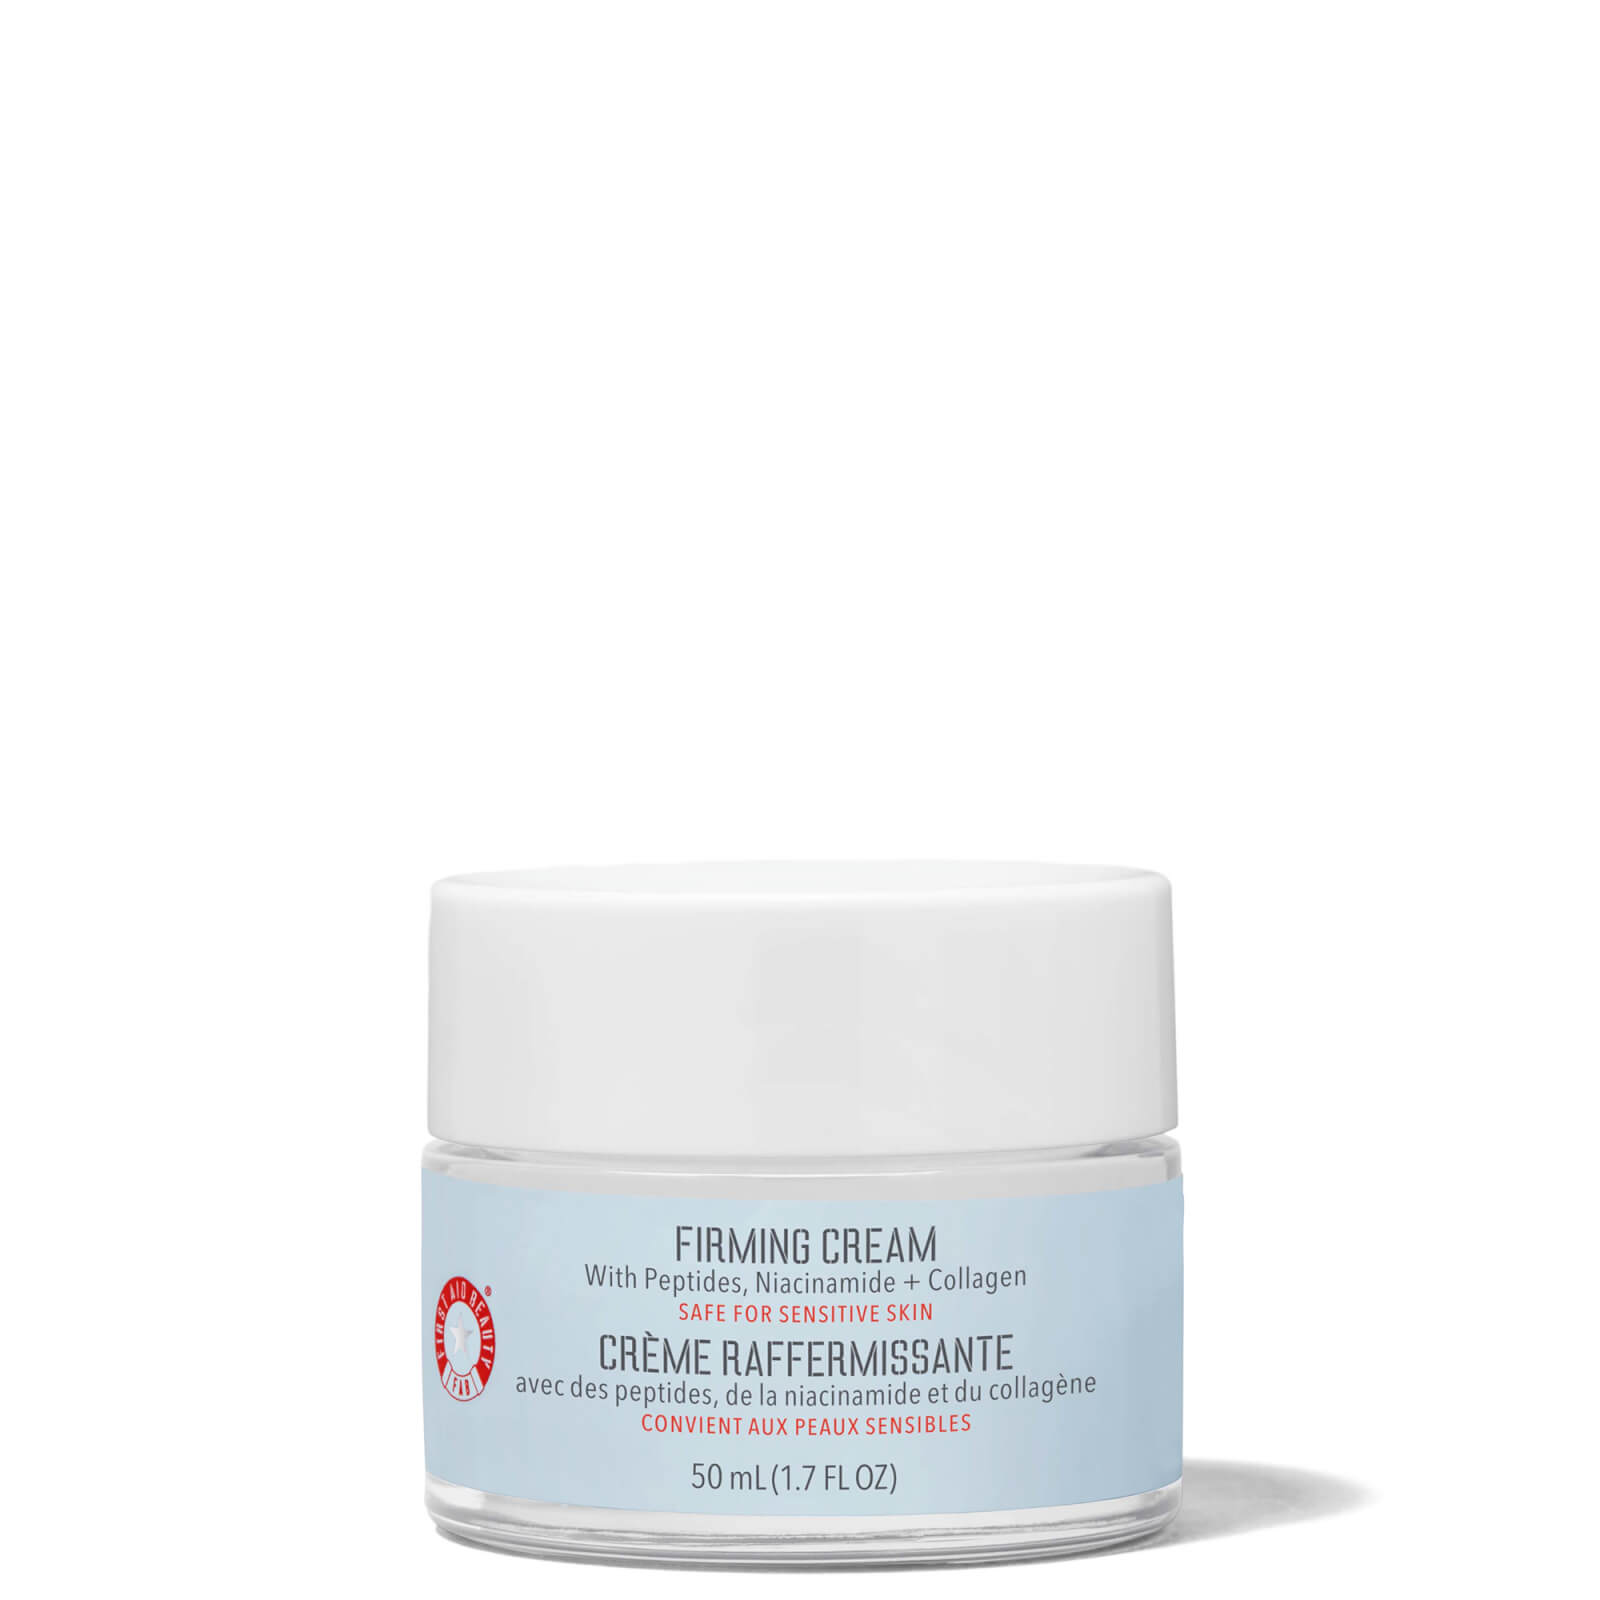 Image of First Aid Beauty Firming Cream with Peptides, Niacinamide + Collagen 50ml